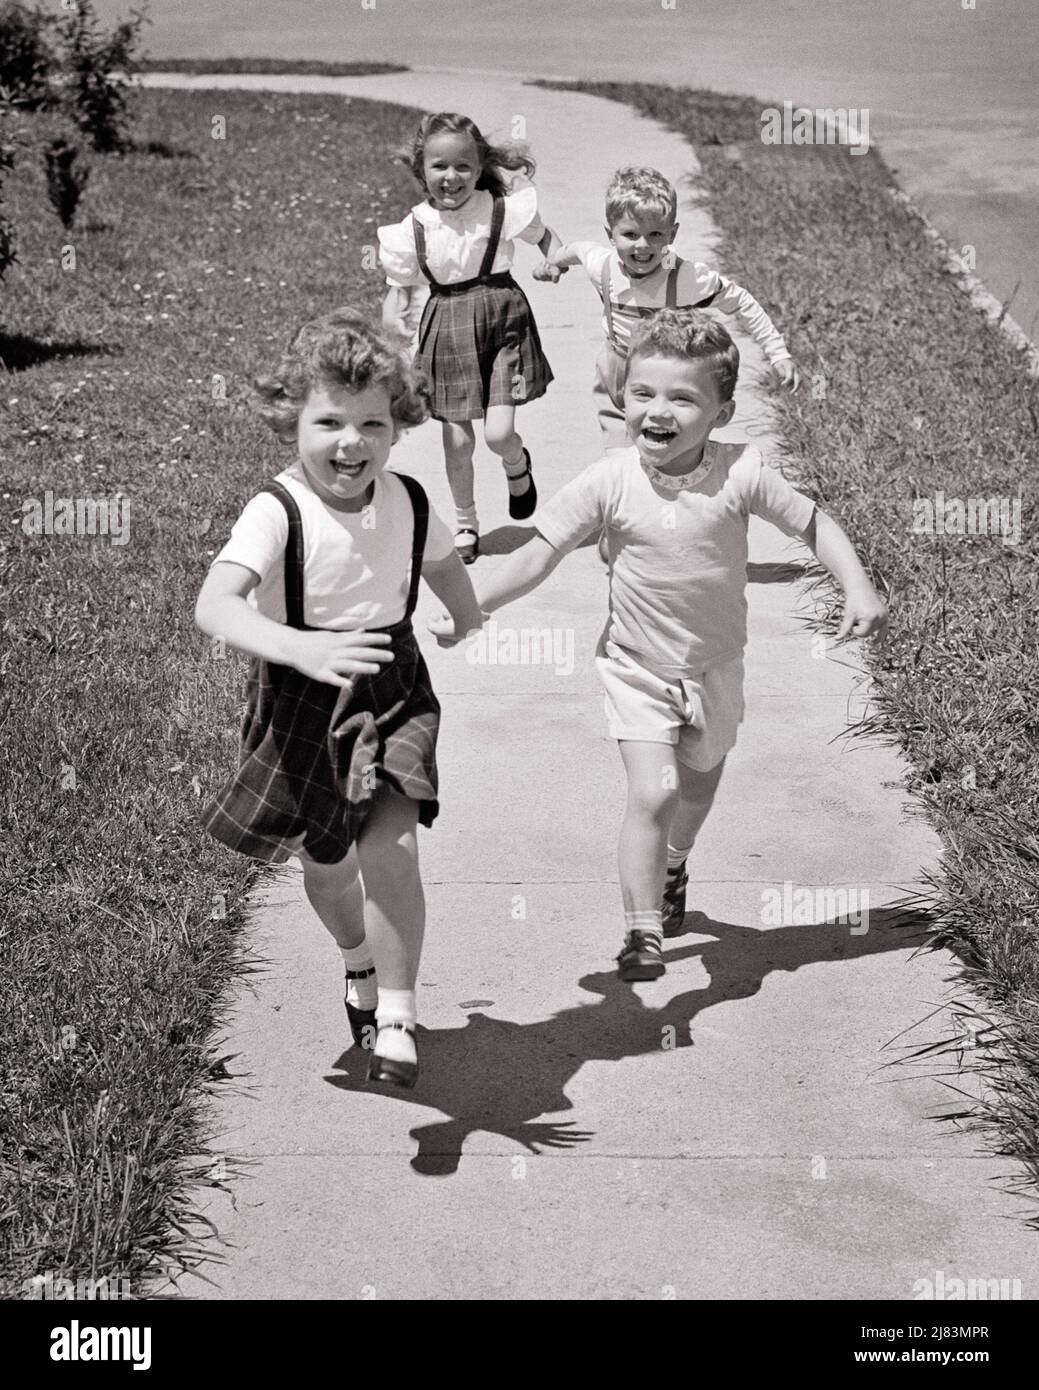 https://c8.alamy.com/comp/2J83MPR/1950s-four-kids-running-on-suburban-sidewalk-towards-looking-at-camera-two-boy-and-girl-couples-holding-hands-smiling-laughing-j3967-har001-hars-brother-old-fashion-sister-fitness-juvenile-facial-laugh-healthy-friend-teamwork-competition-pleased-joy-lifestyle-speed-females-brothers-healthiness-friendship-full-length-physical-fitness-persons-males-siblings-towards-confidence-sisters-expressions-bw-eye-contact-freedom-activity-happiness-physical-wellness-cheerful-strength-and-excitement-recreation-pride-holding-hands-on-sibling-smiles-conceptual-flexibility-friendly-joyful-muscles-stylish-2J83MPR.jpg